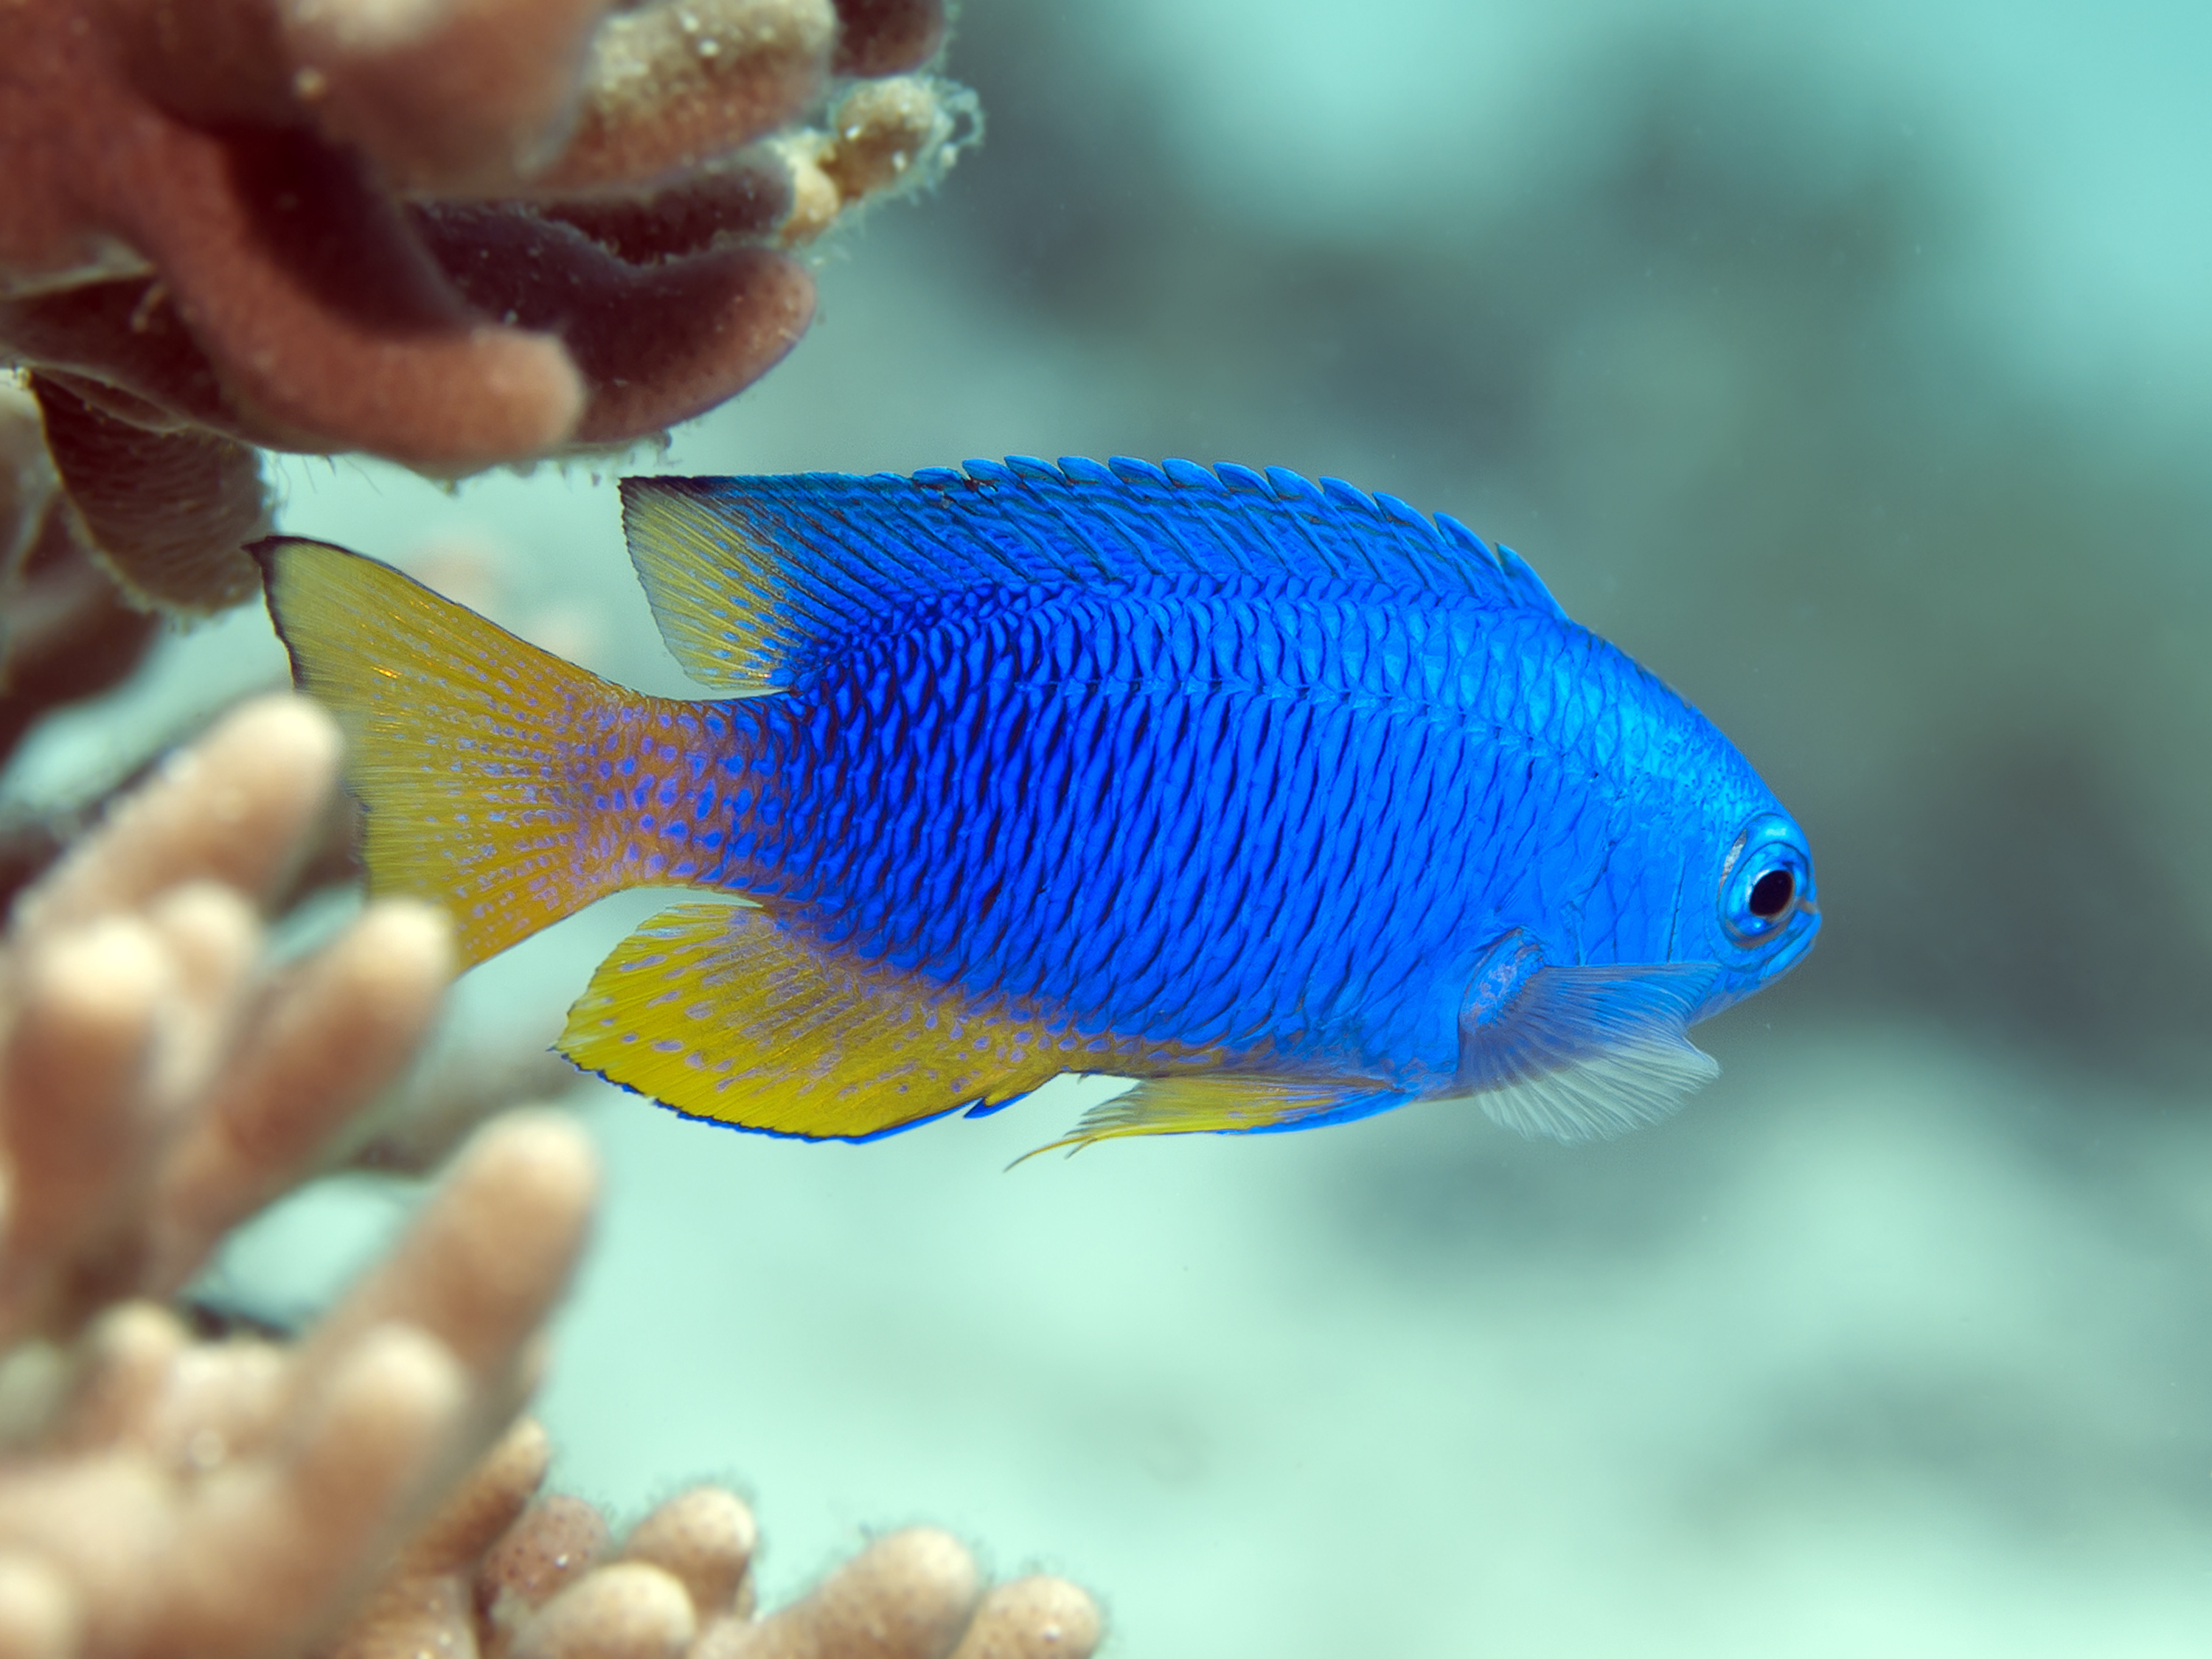 Reel Life Fish ID: Can You Identify This Reef Fish?